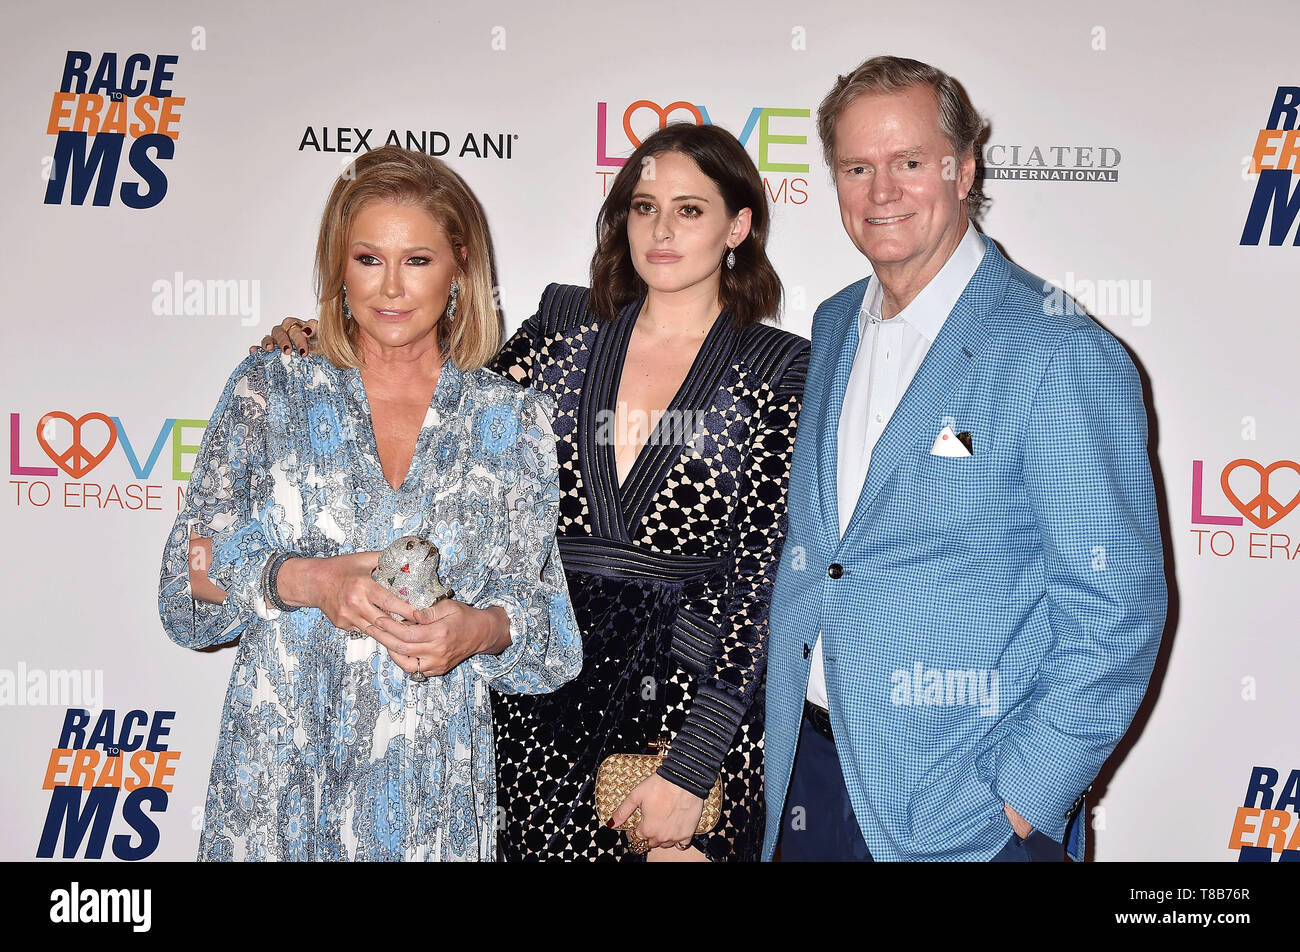 BEVERLY HILLS, CA - MAY 10: (L-R) Kathy Hilton, Alexa Dell and Rick Hilton attend the 26th Annual Race to Erase MS Gala at The Beverly Hilton Hotel on May 10, 2019 in Beverly Hills, California. Stock Photo